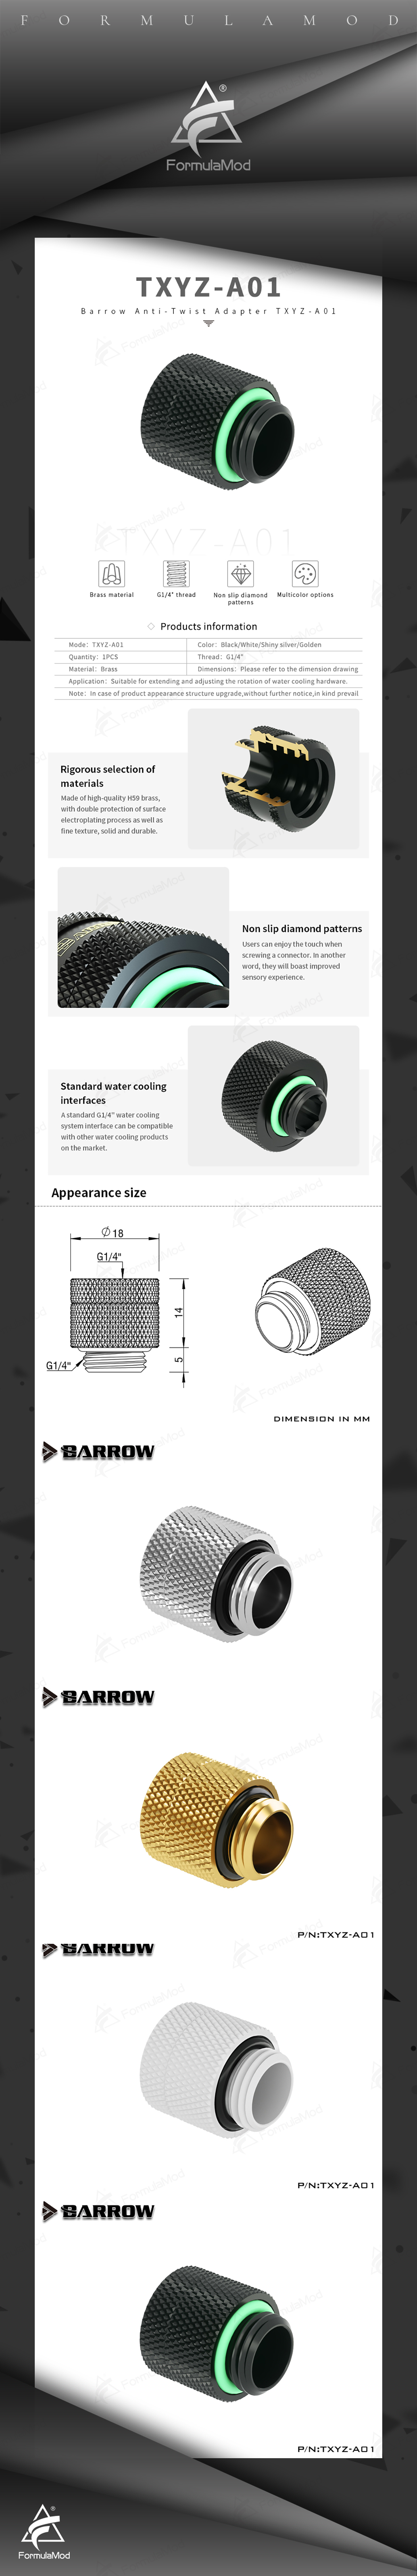 Barrow 13mm Male To Female ExtenderRotary Fittings , G1/4 Male To Female Water Cooling Fittings,TXYZ-A01  